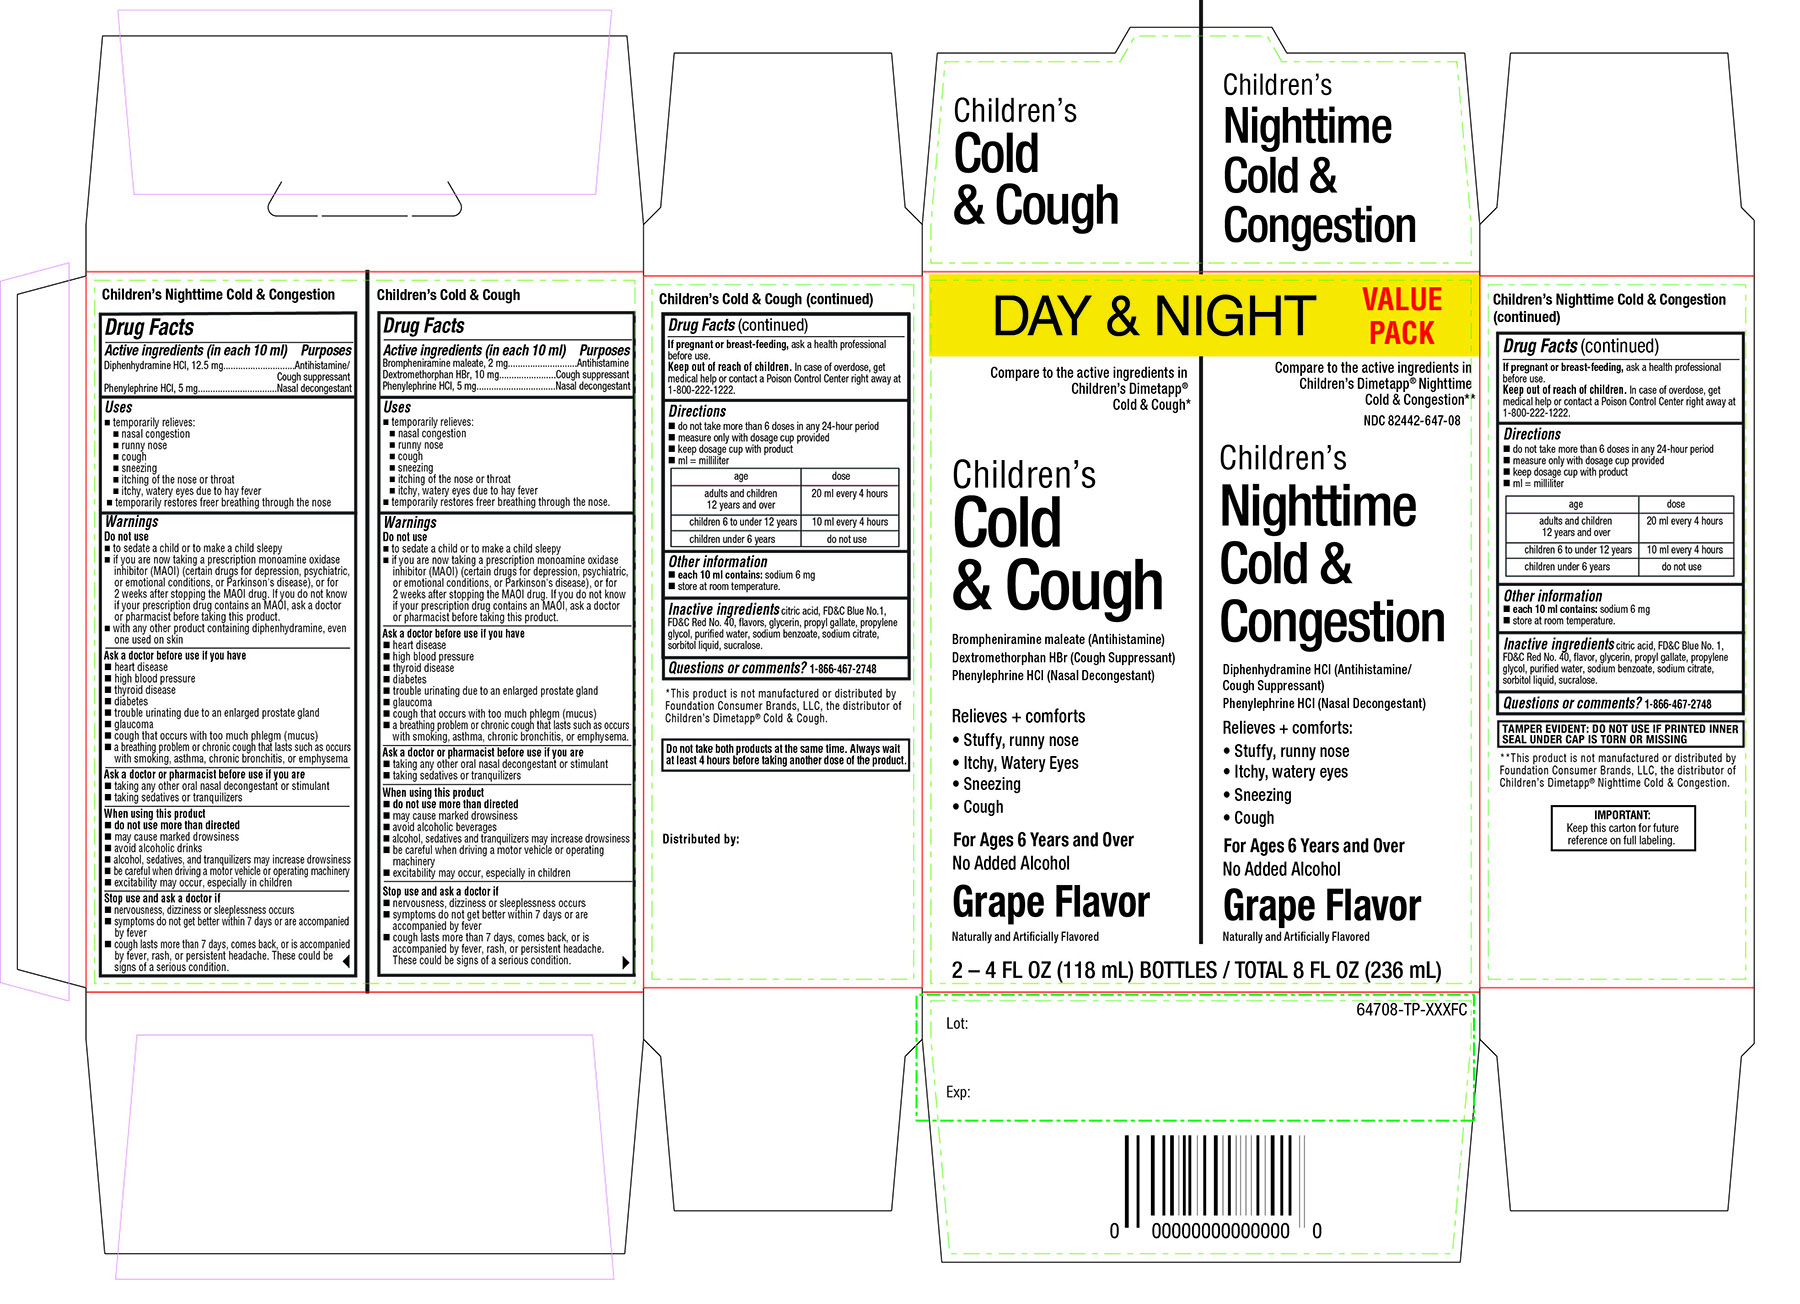 Target Children's Cold & Cough Day & Nighttime Value Pack 236 mL